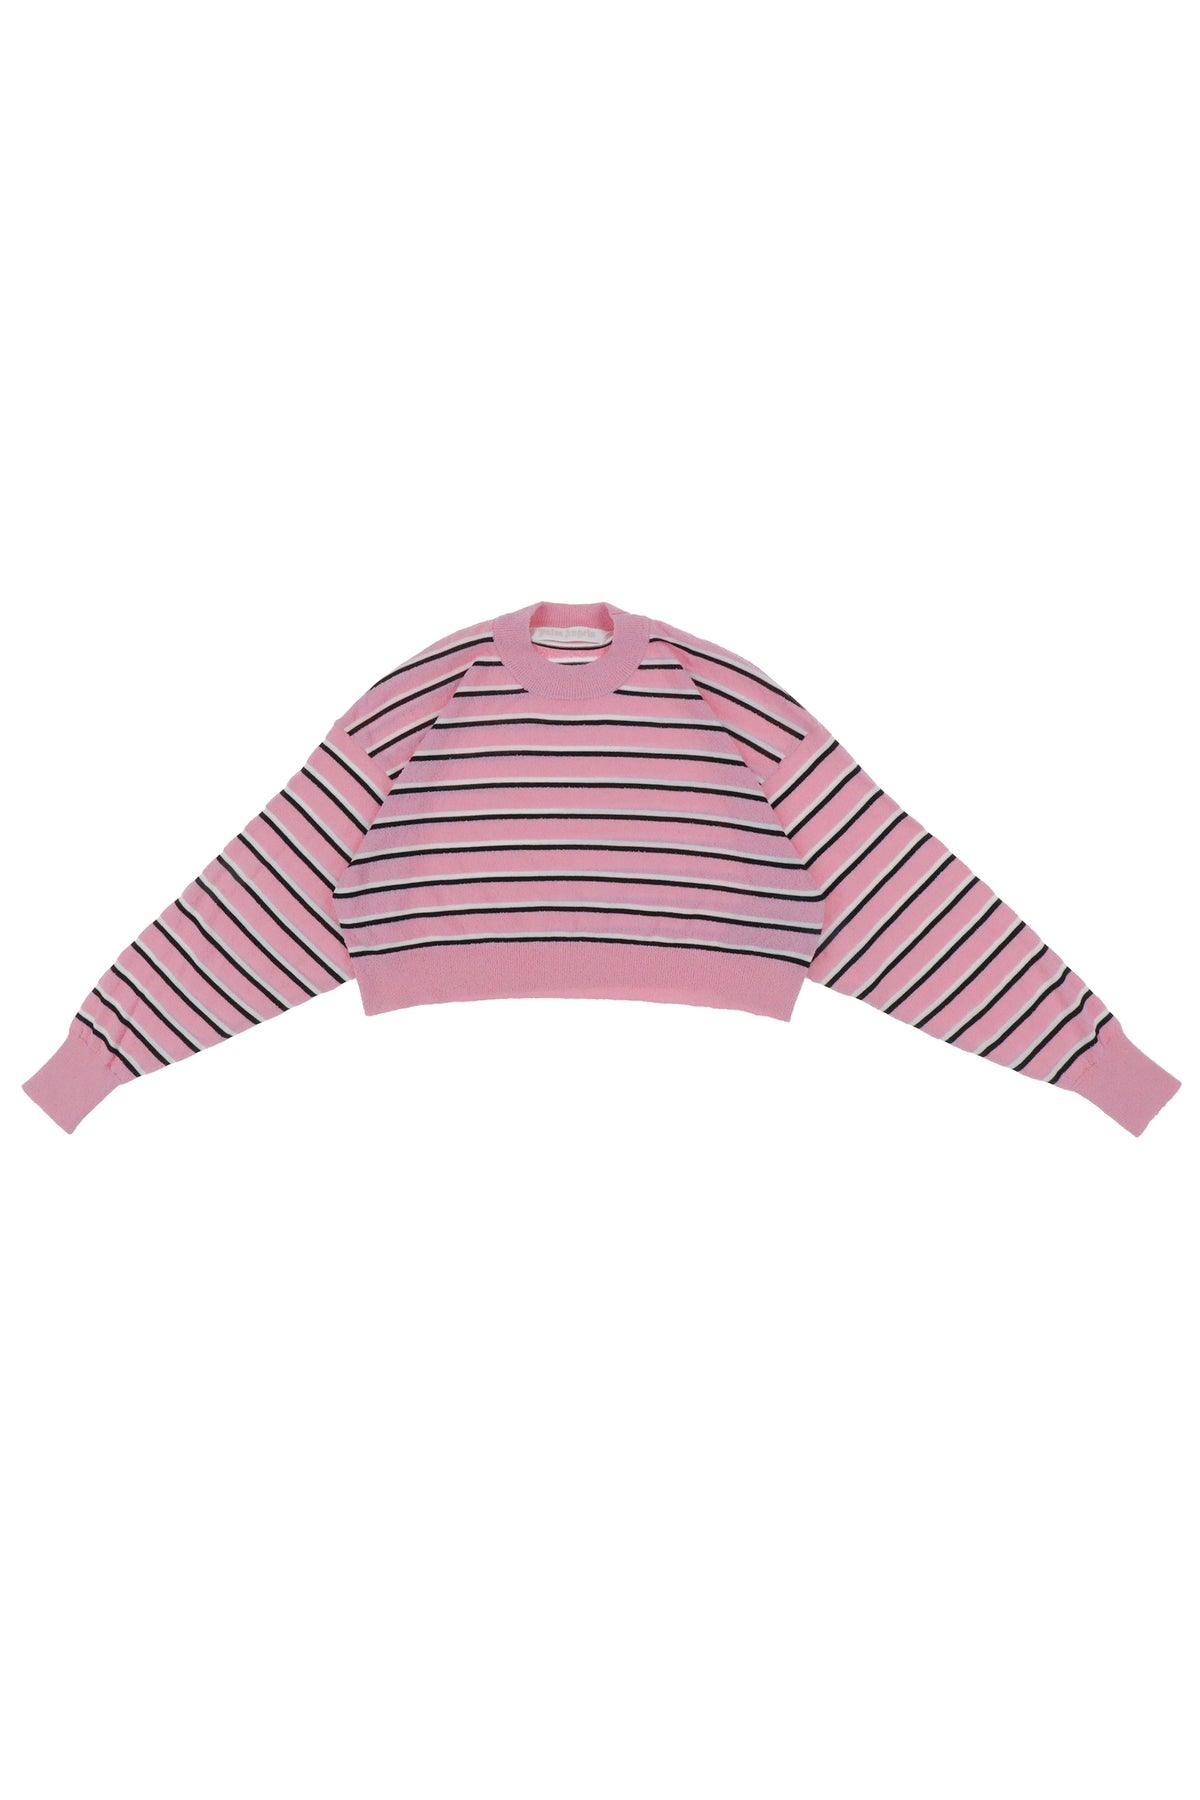 Palm Angels STRIPES KNIT CROPPED SWEATER / PNK MULTI